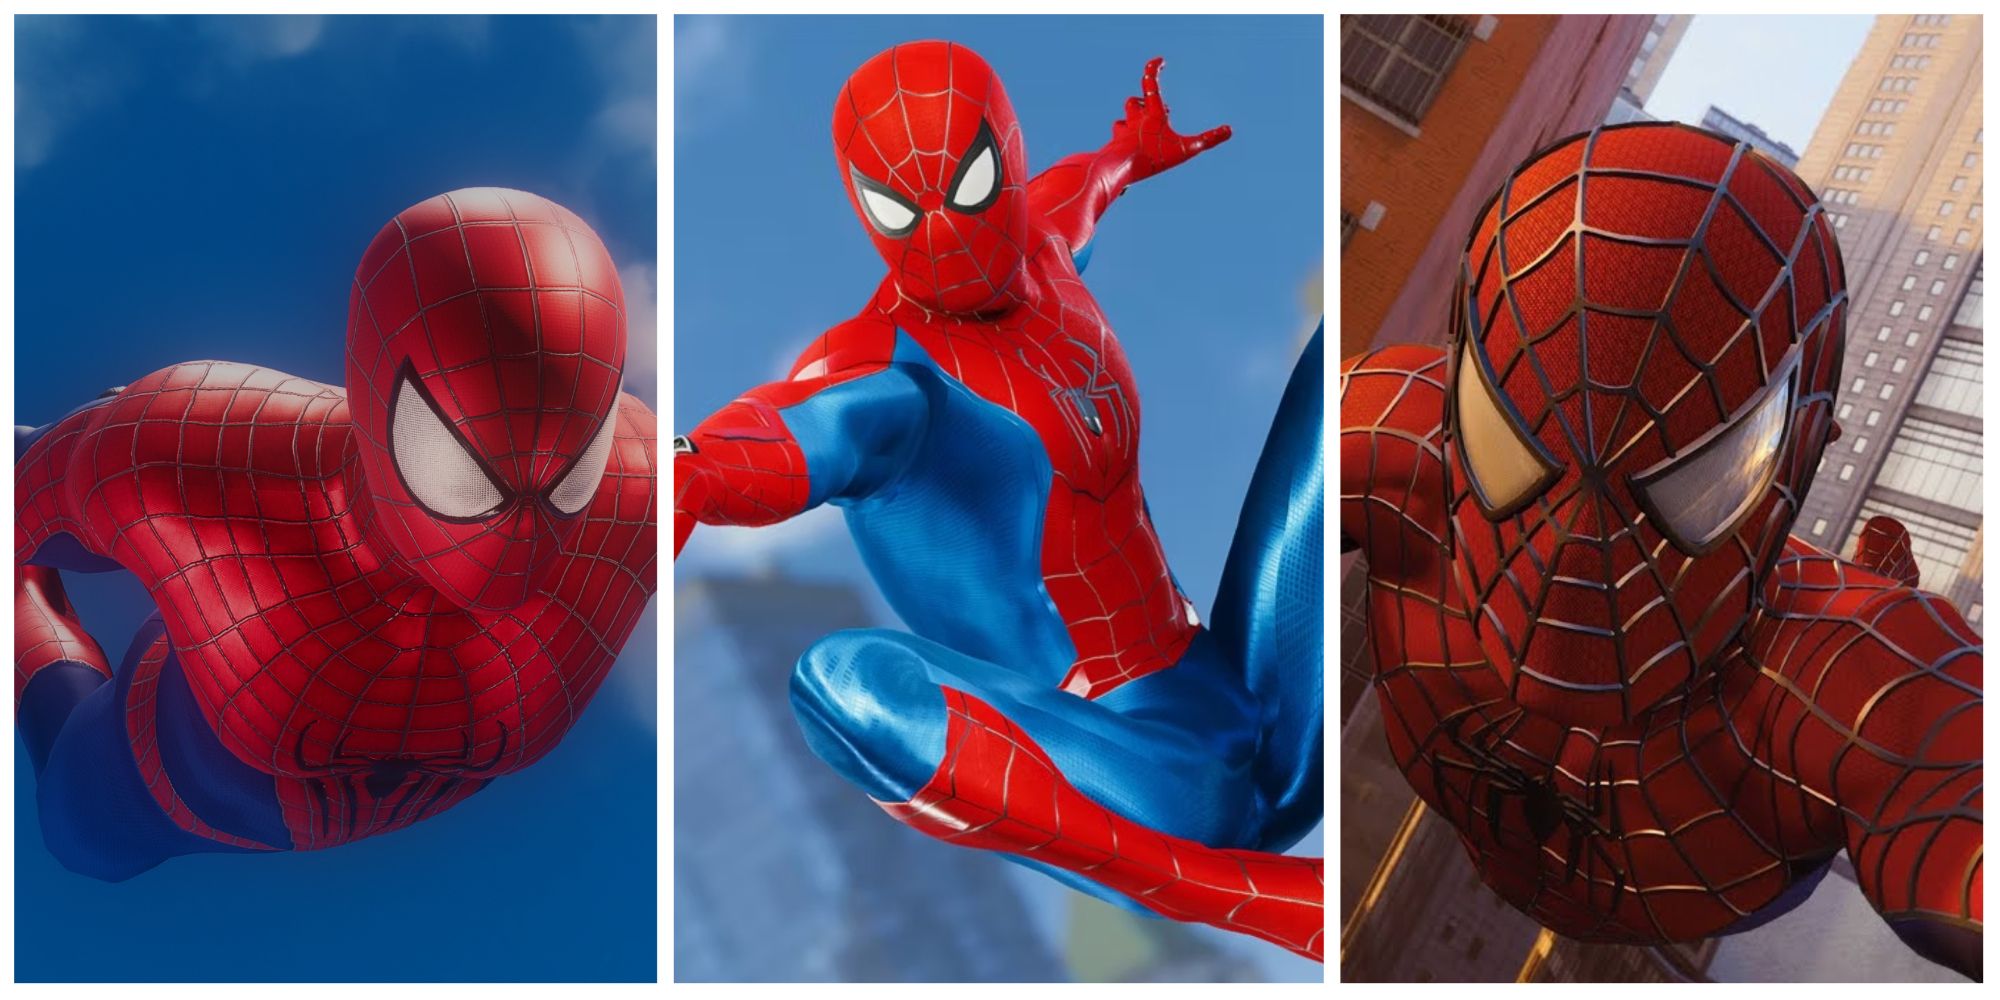 andrew garfield, tobey maguire, tom holland spider-man suits in pc marvel spider-man 